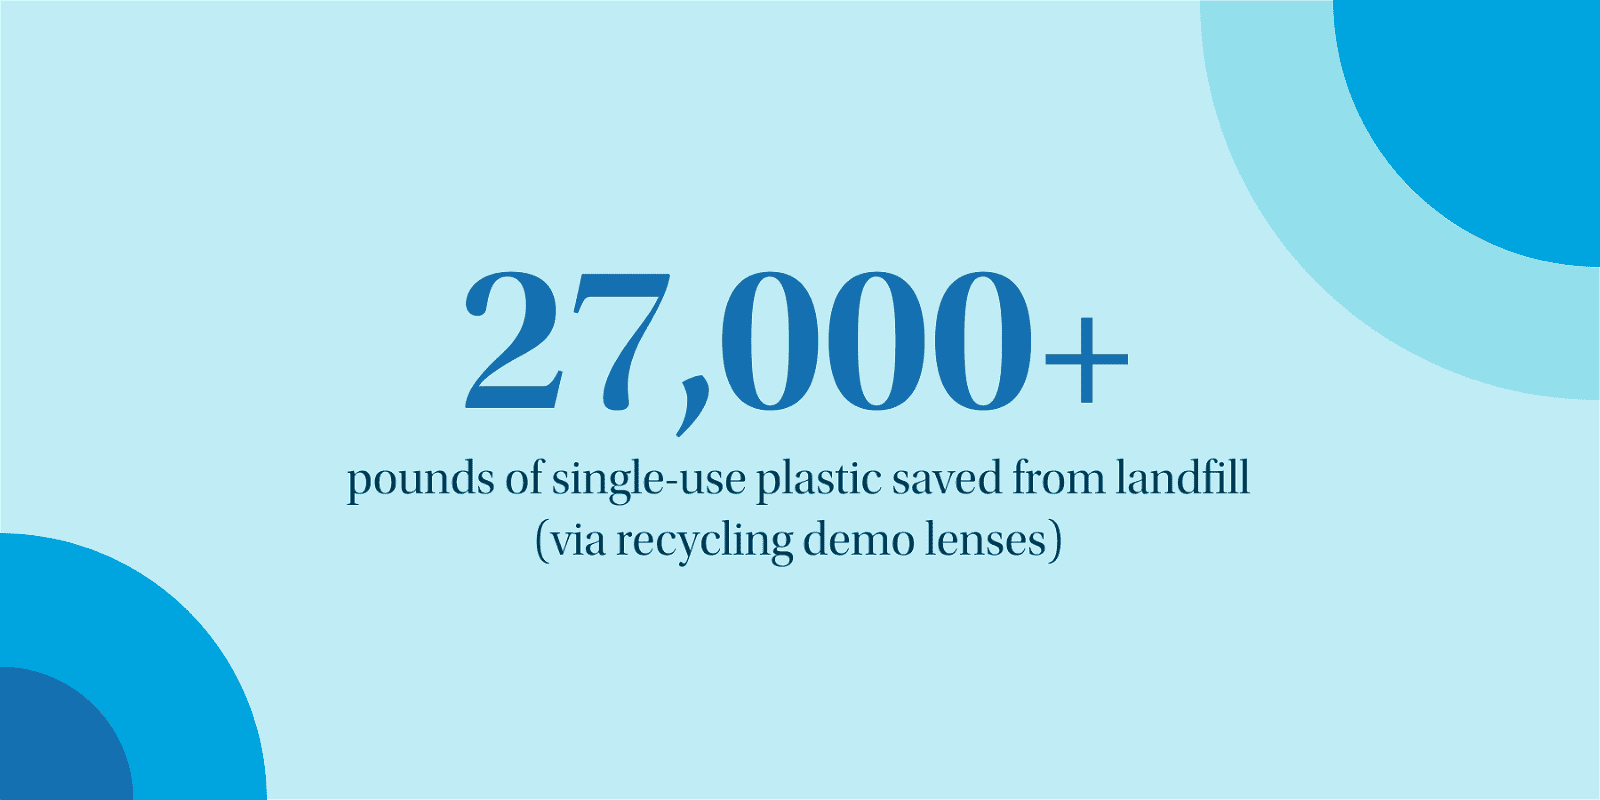 27,000 pounds of single-use plastic saved from landfill